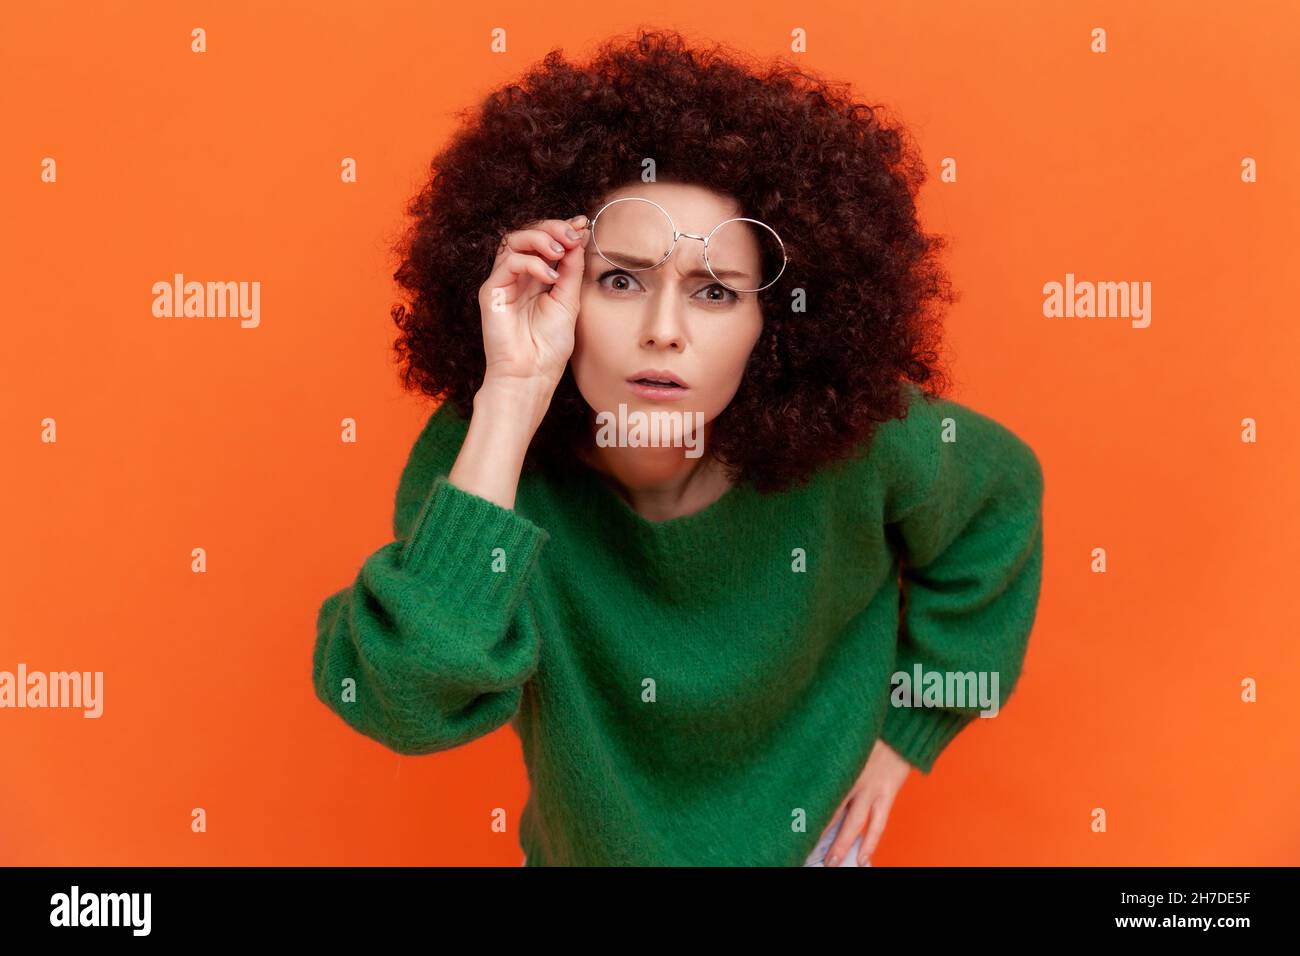 Curious woman with Afro hairstyle wearing green casual style sweater raising her optical glasses, wants to see something better, staring attentively. Indoor studio shot isolated on orange background. Stock Photo